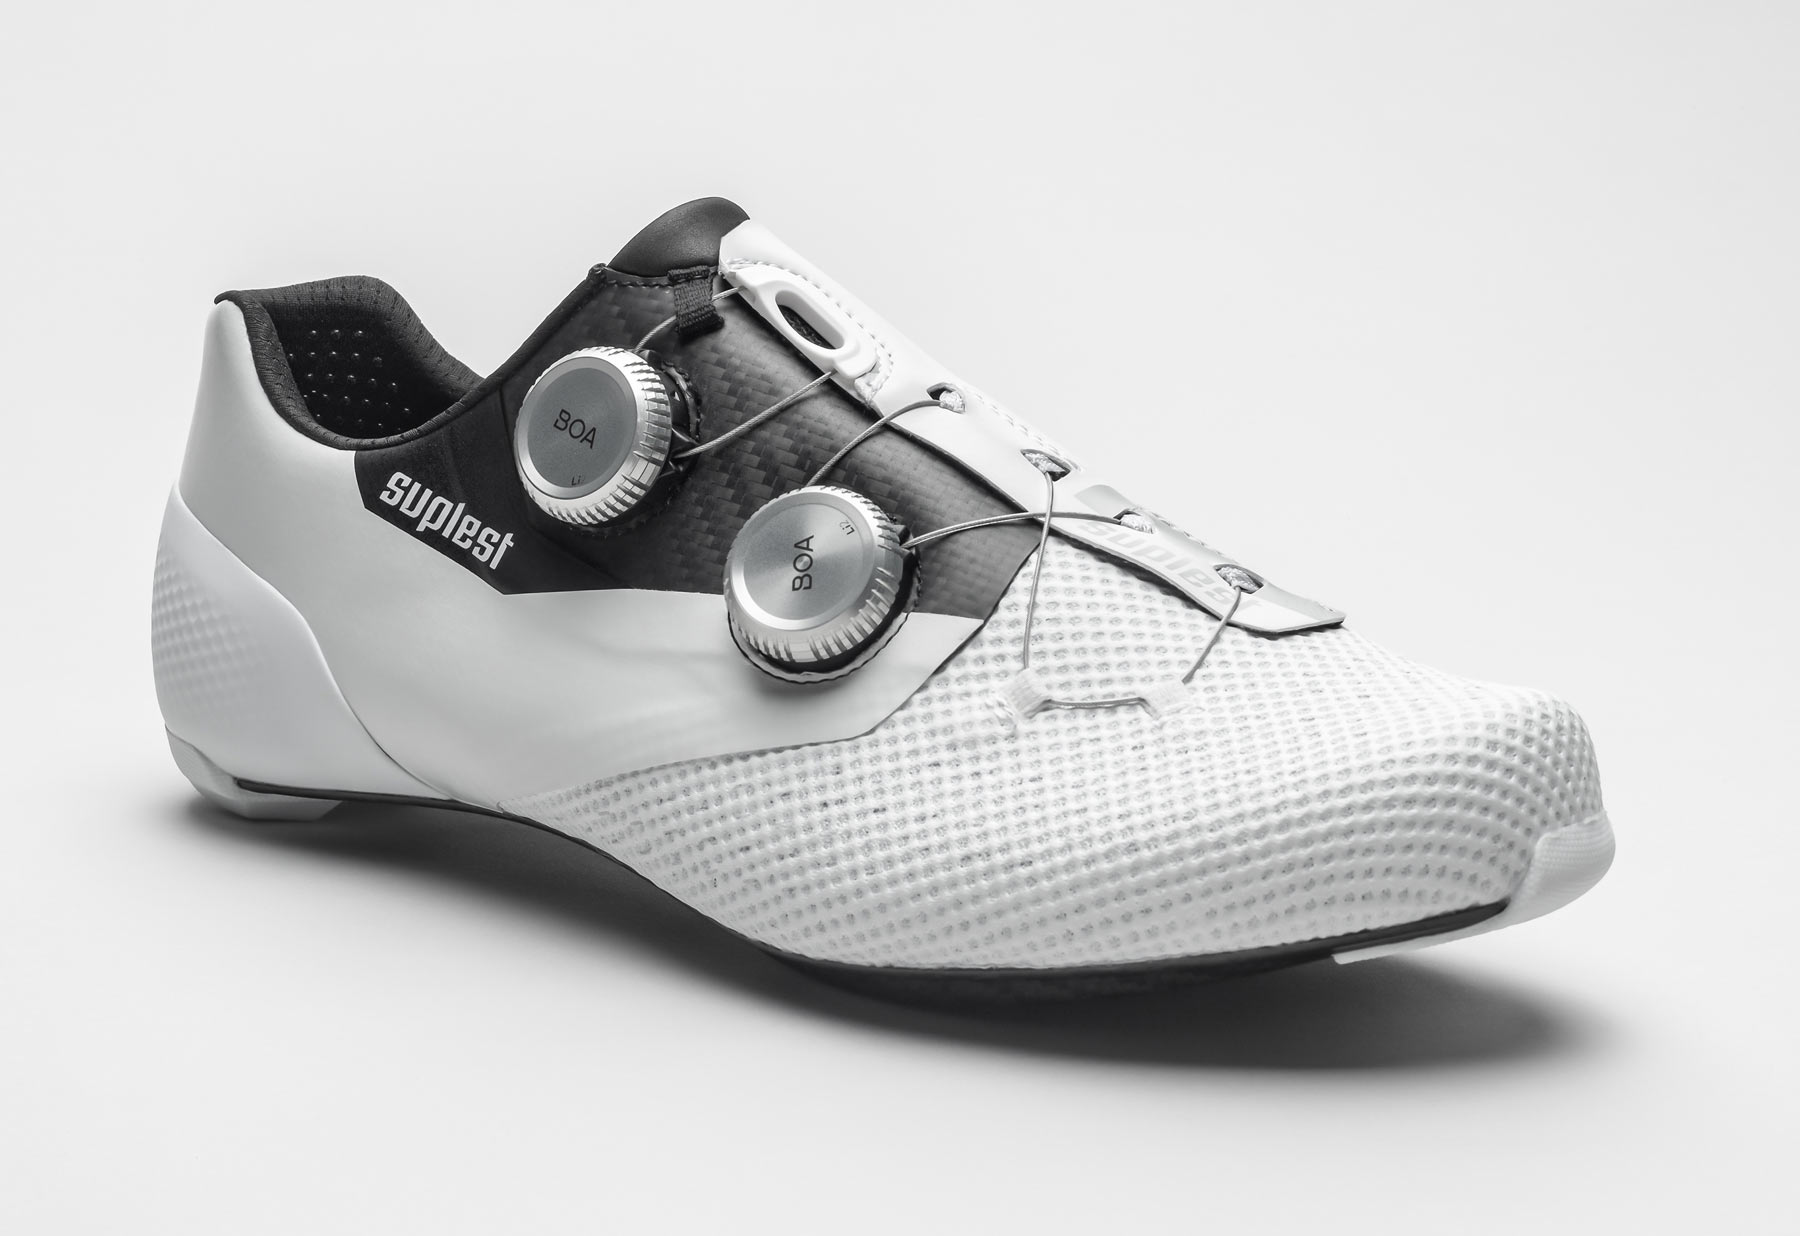 Cancellera signature Suplest Edge 2.0 road bike shoes shown from front angle